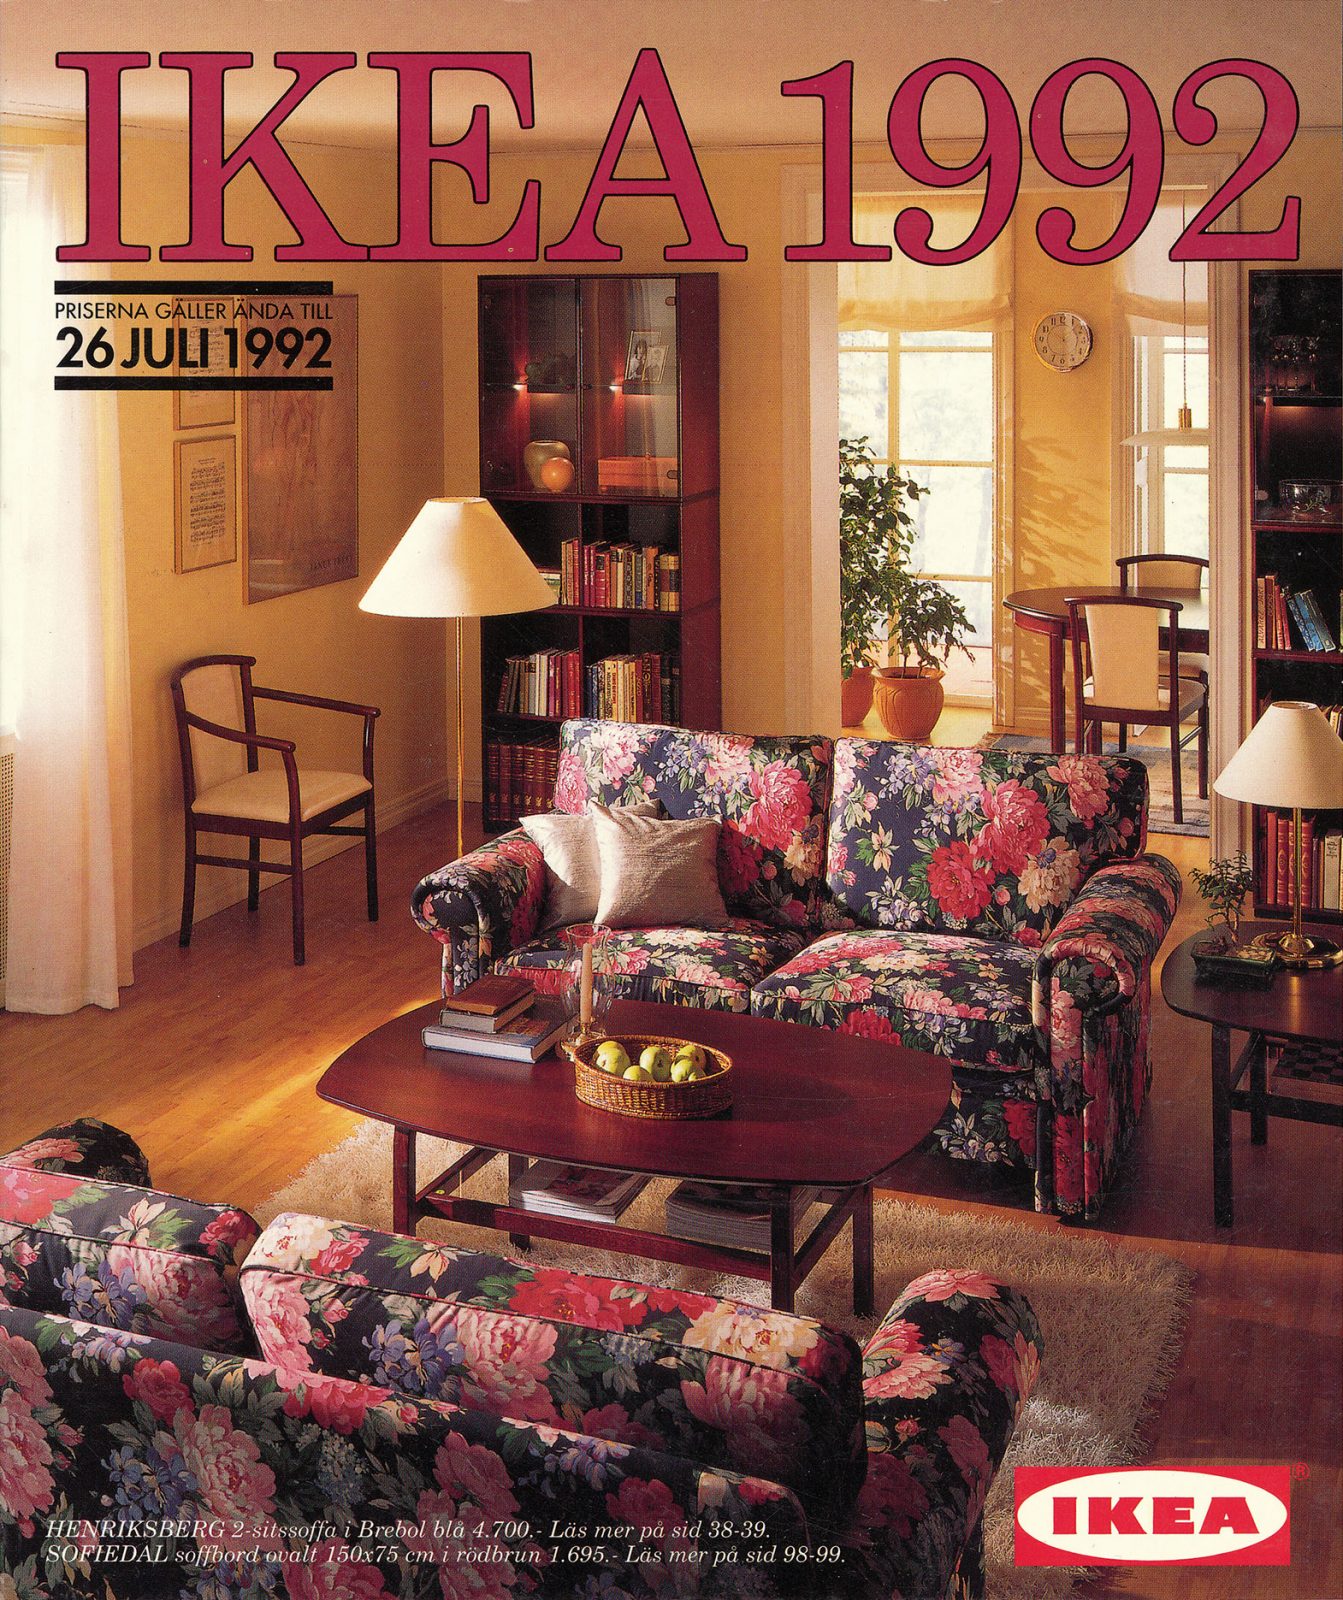 Ikea Discontinues Its Catalog After 70 Years : NPR